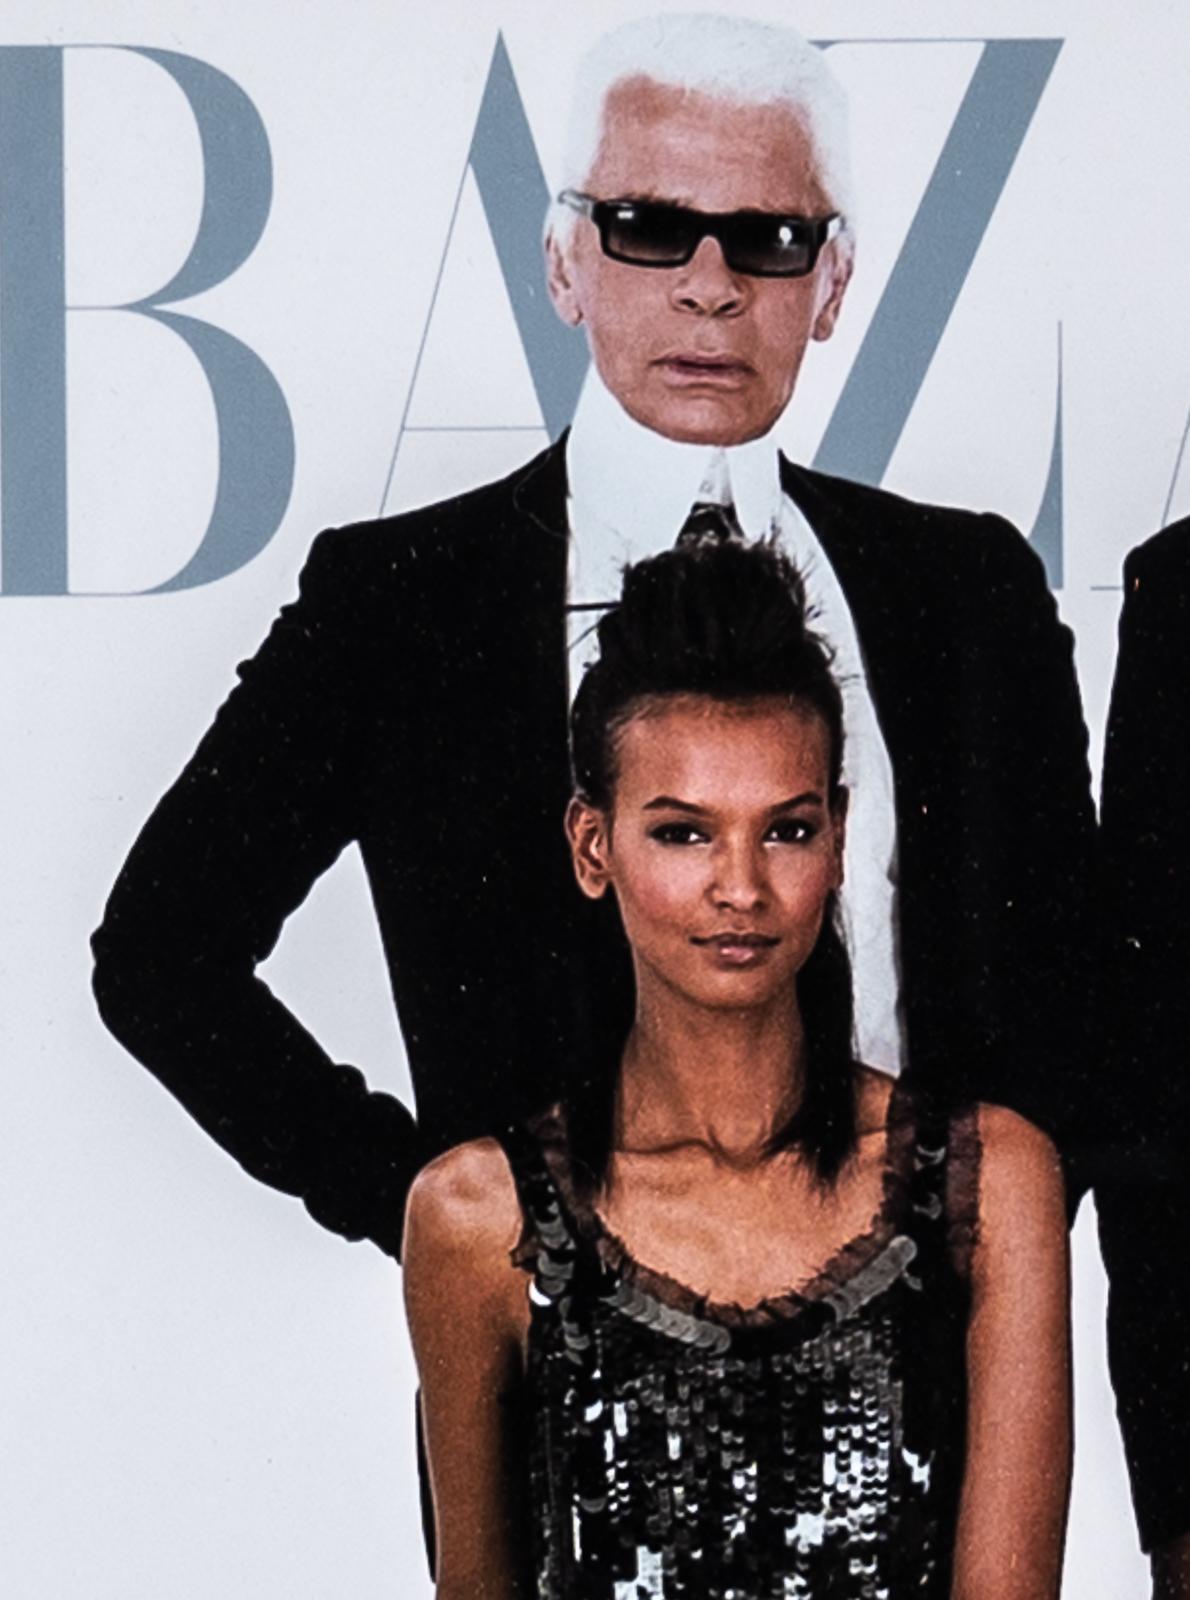 Modern Cover Photo of Karl Lagerfeld with Models for Bazaar Magazine For Sale